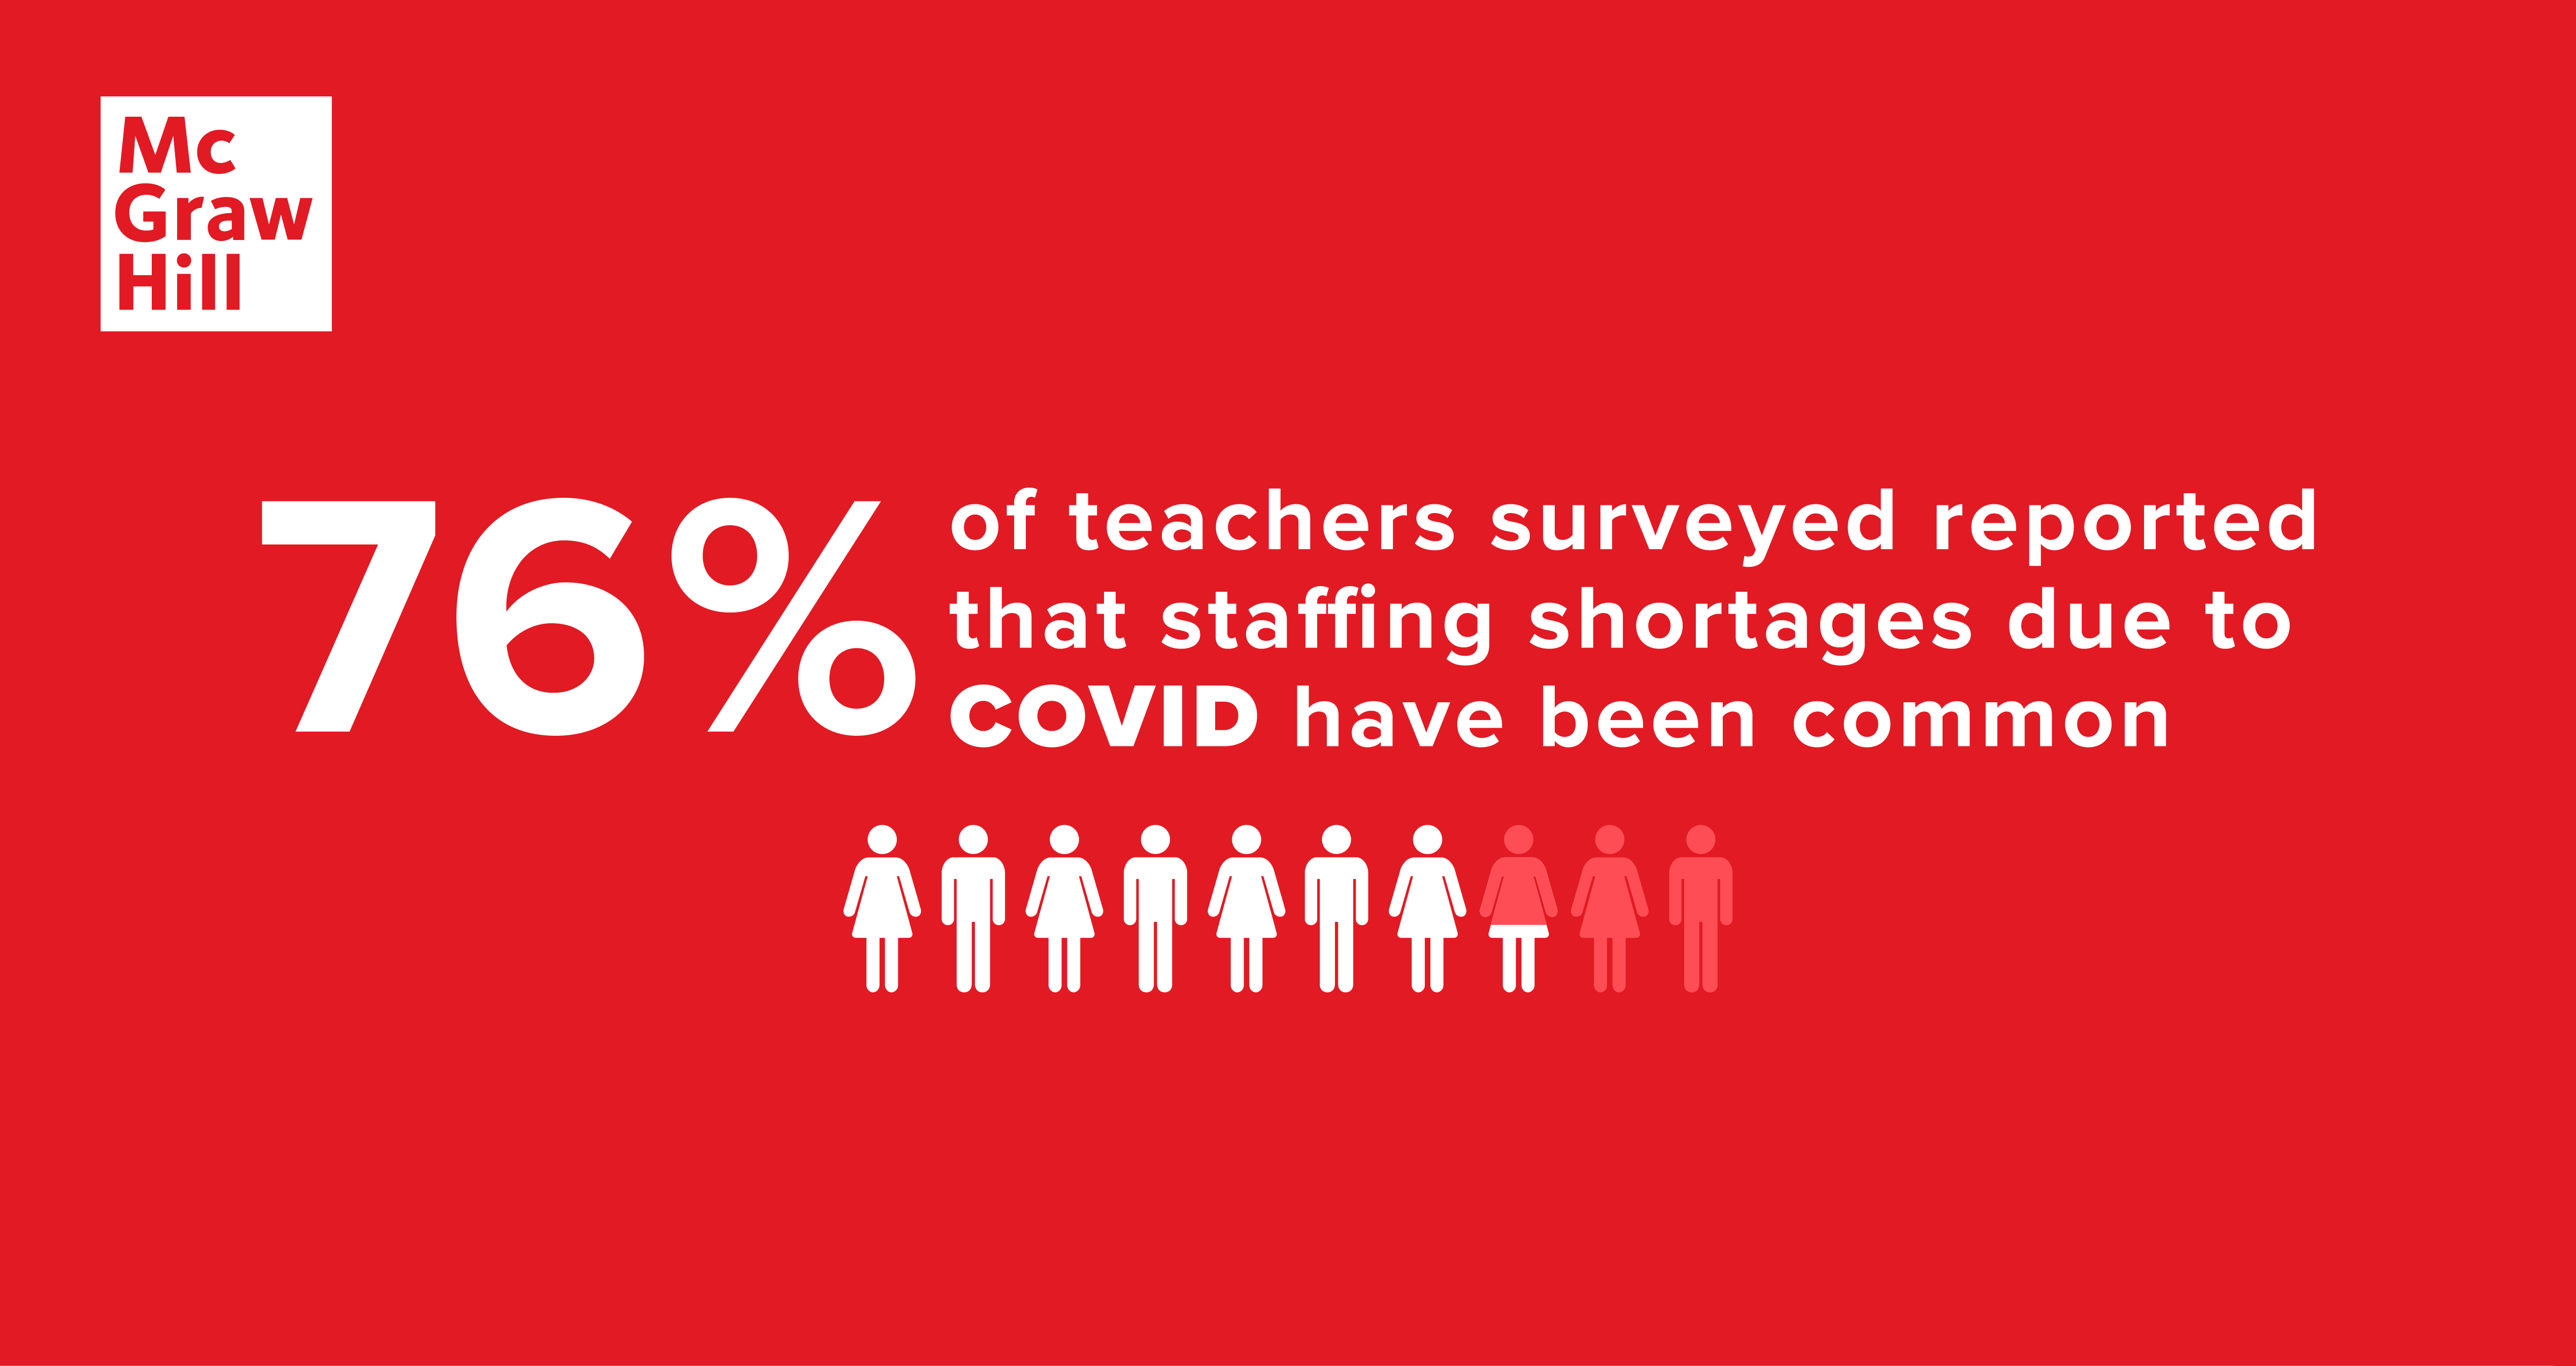 76% of teachers surveyed reported that staffing shortages due to COVID have been common